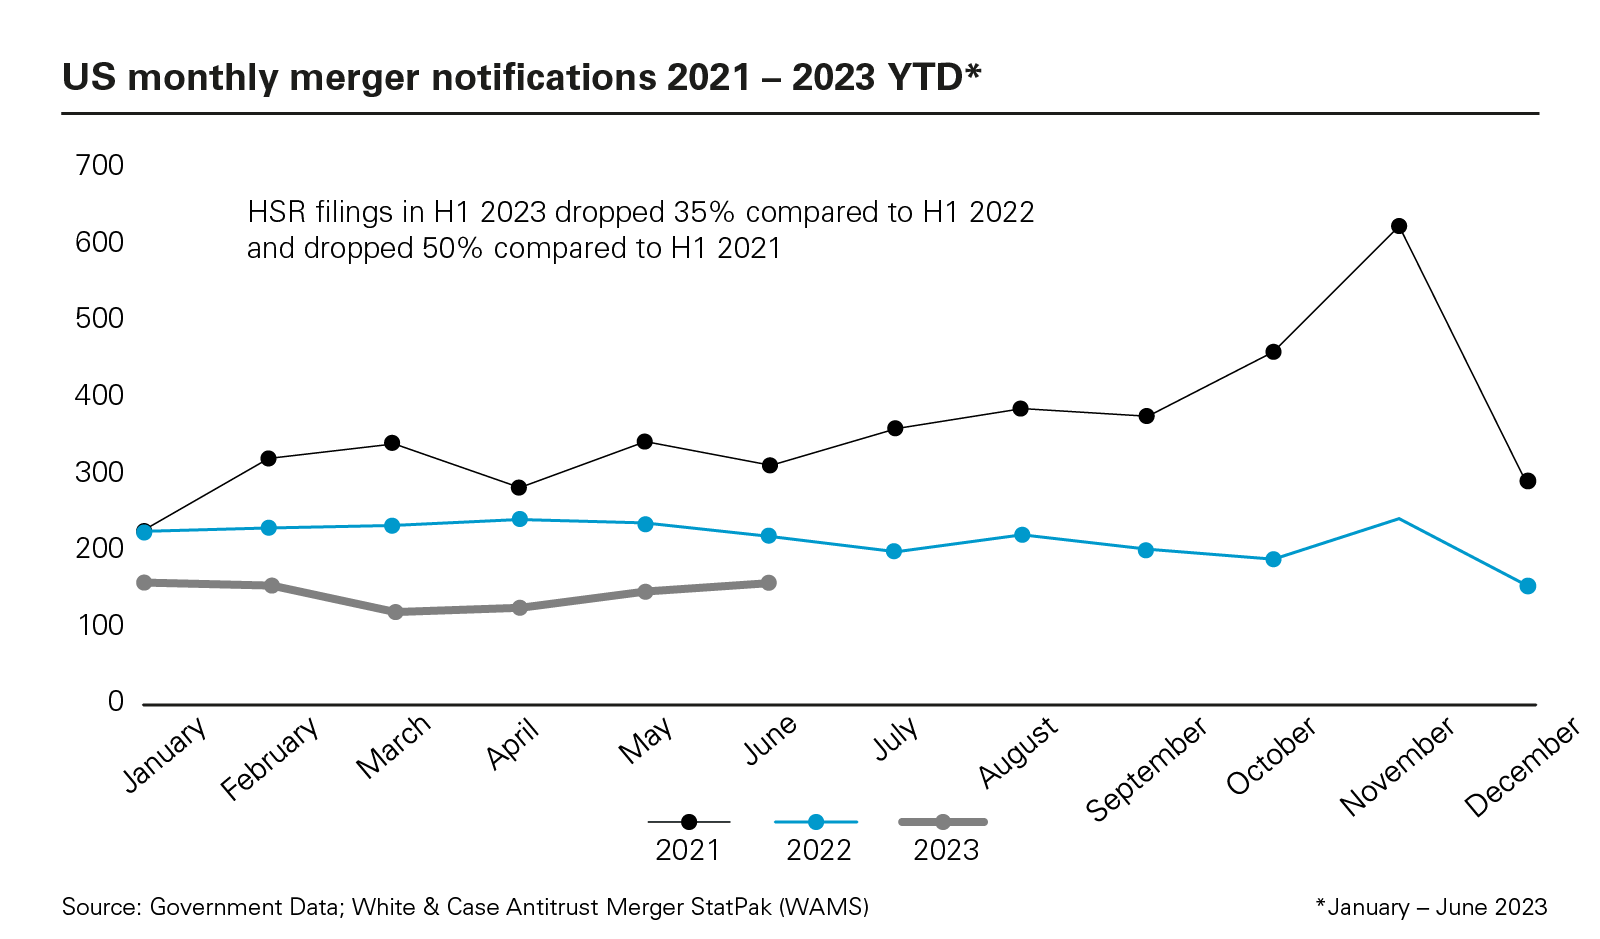 US monthly merger notifications 2021 - 2023 YTD* graph